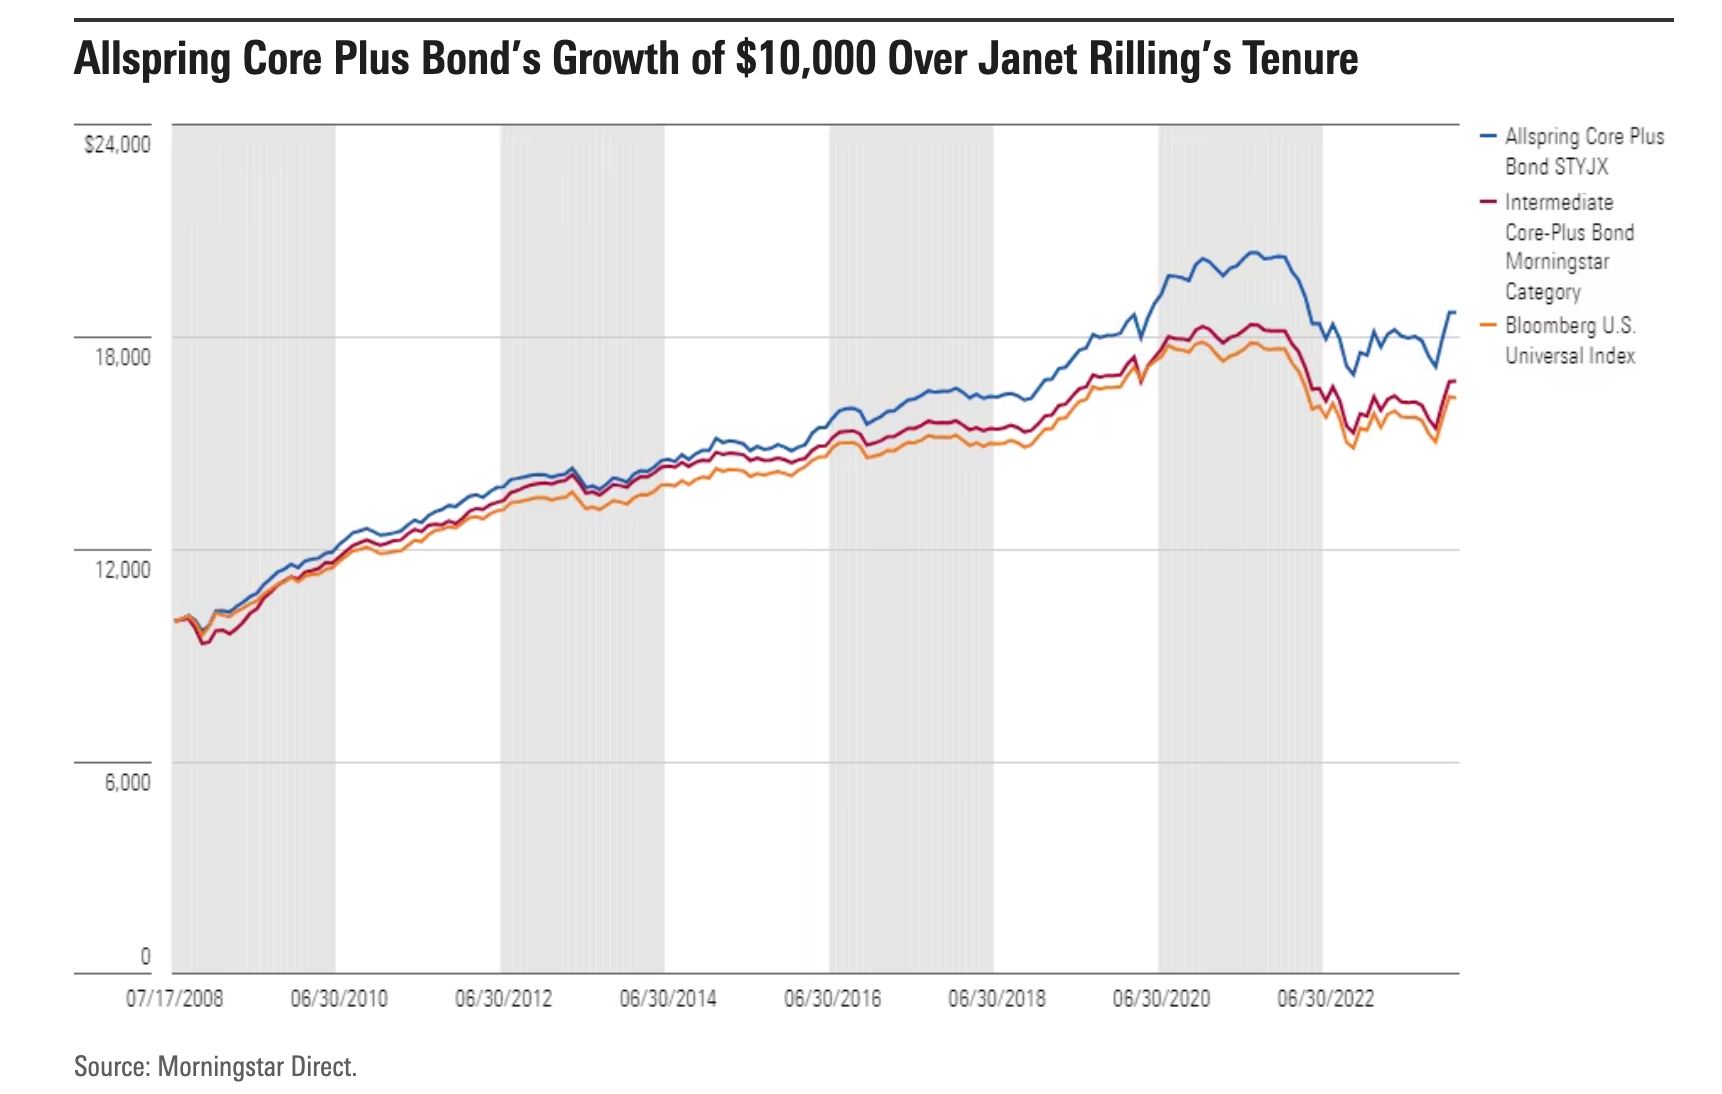 Line graph showing Allspring Core Plus Bond STYJX growth from July 2008 through June 2022 compared to Intermediate Core-Plus Bond Morningstar and Bloomberg US Universal Index.